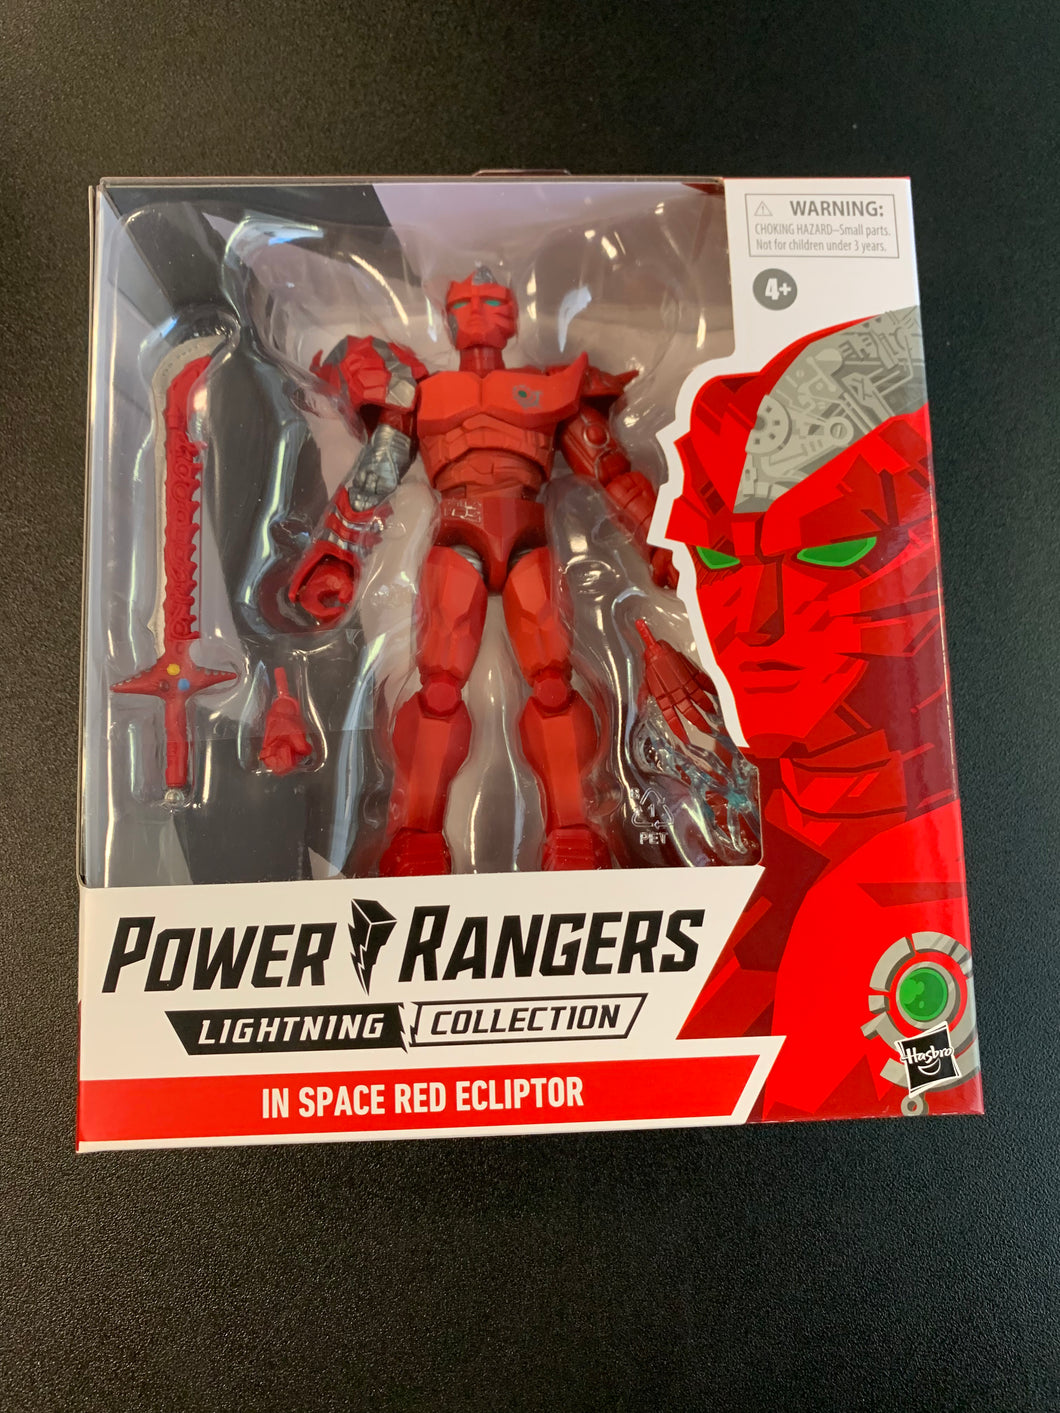 HASBRO POWER RANGERS LIGHTNING COLLECTION IN SPACE RED ECLIPTOR